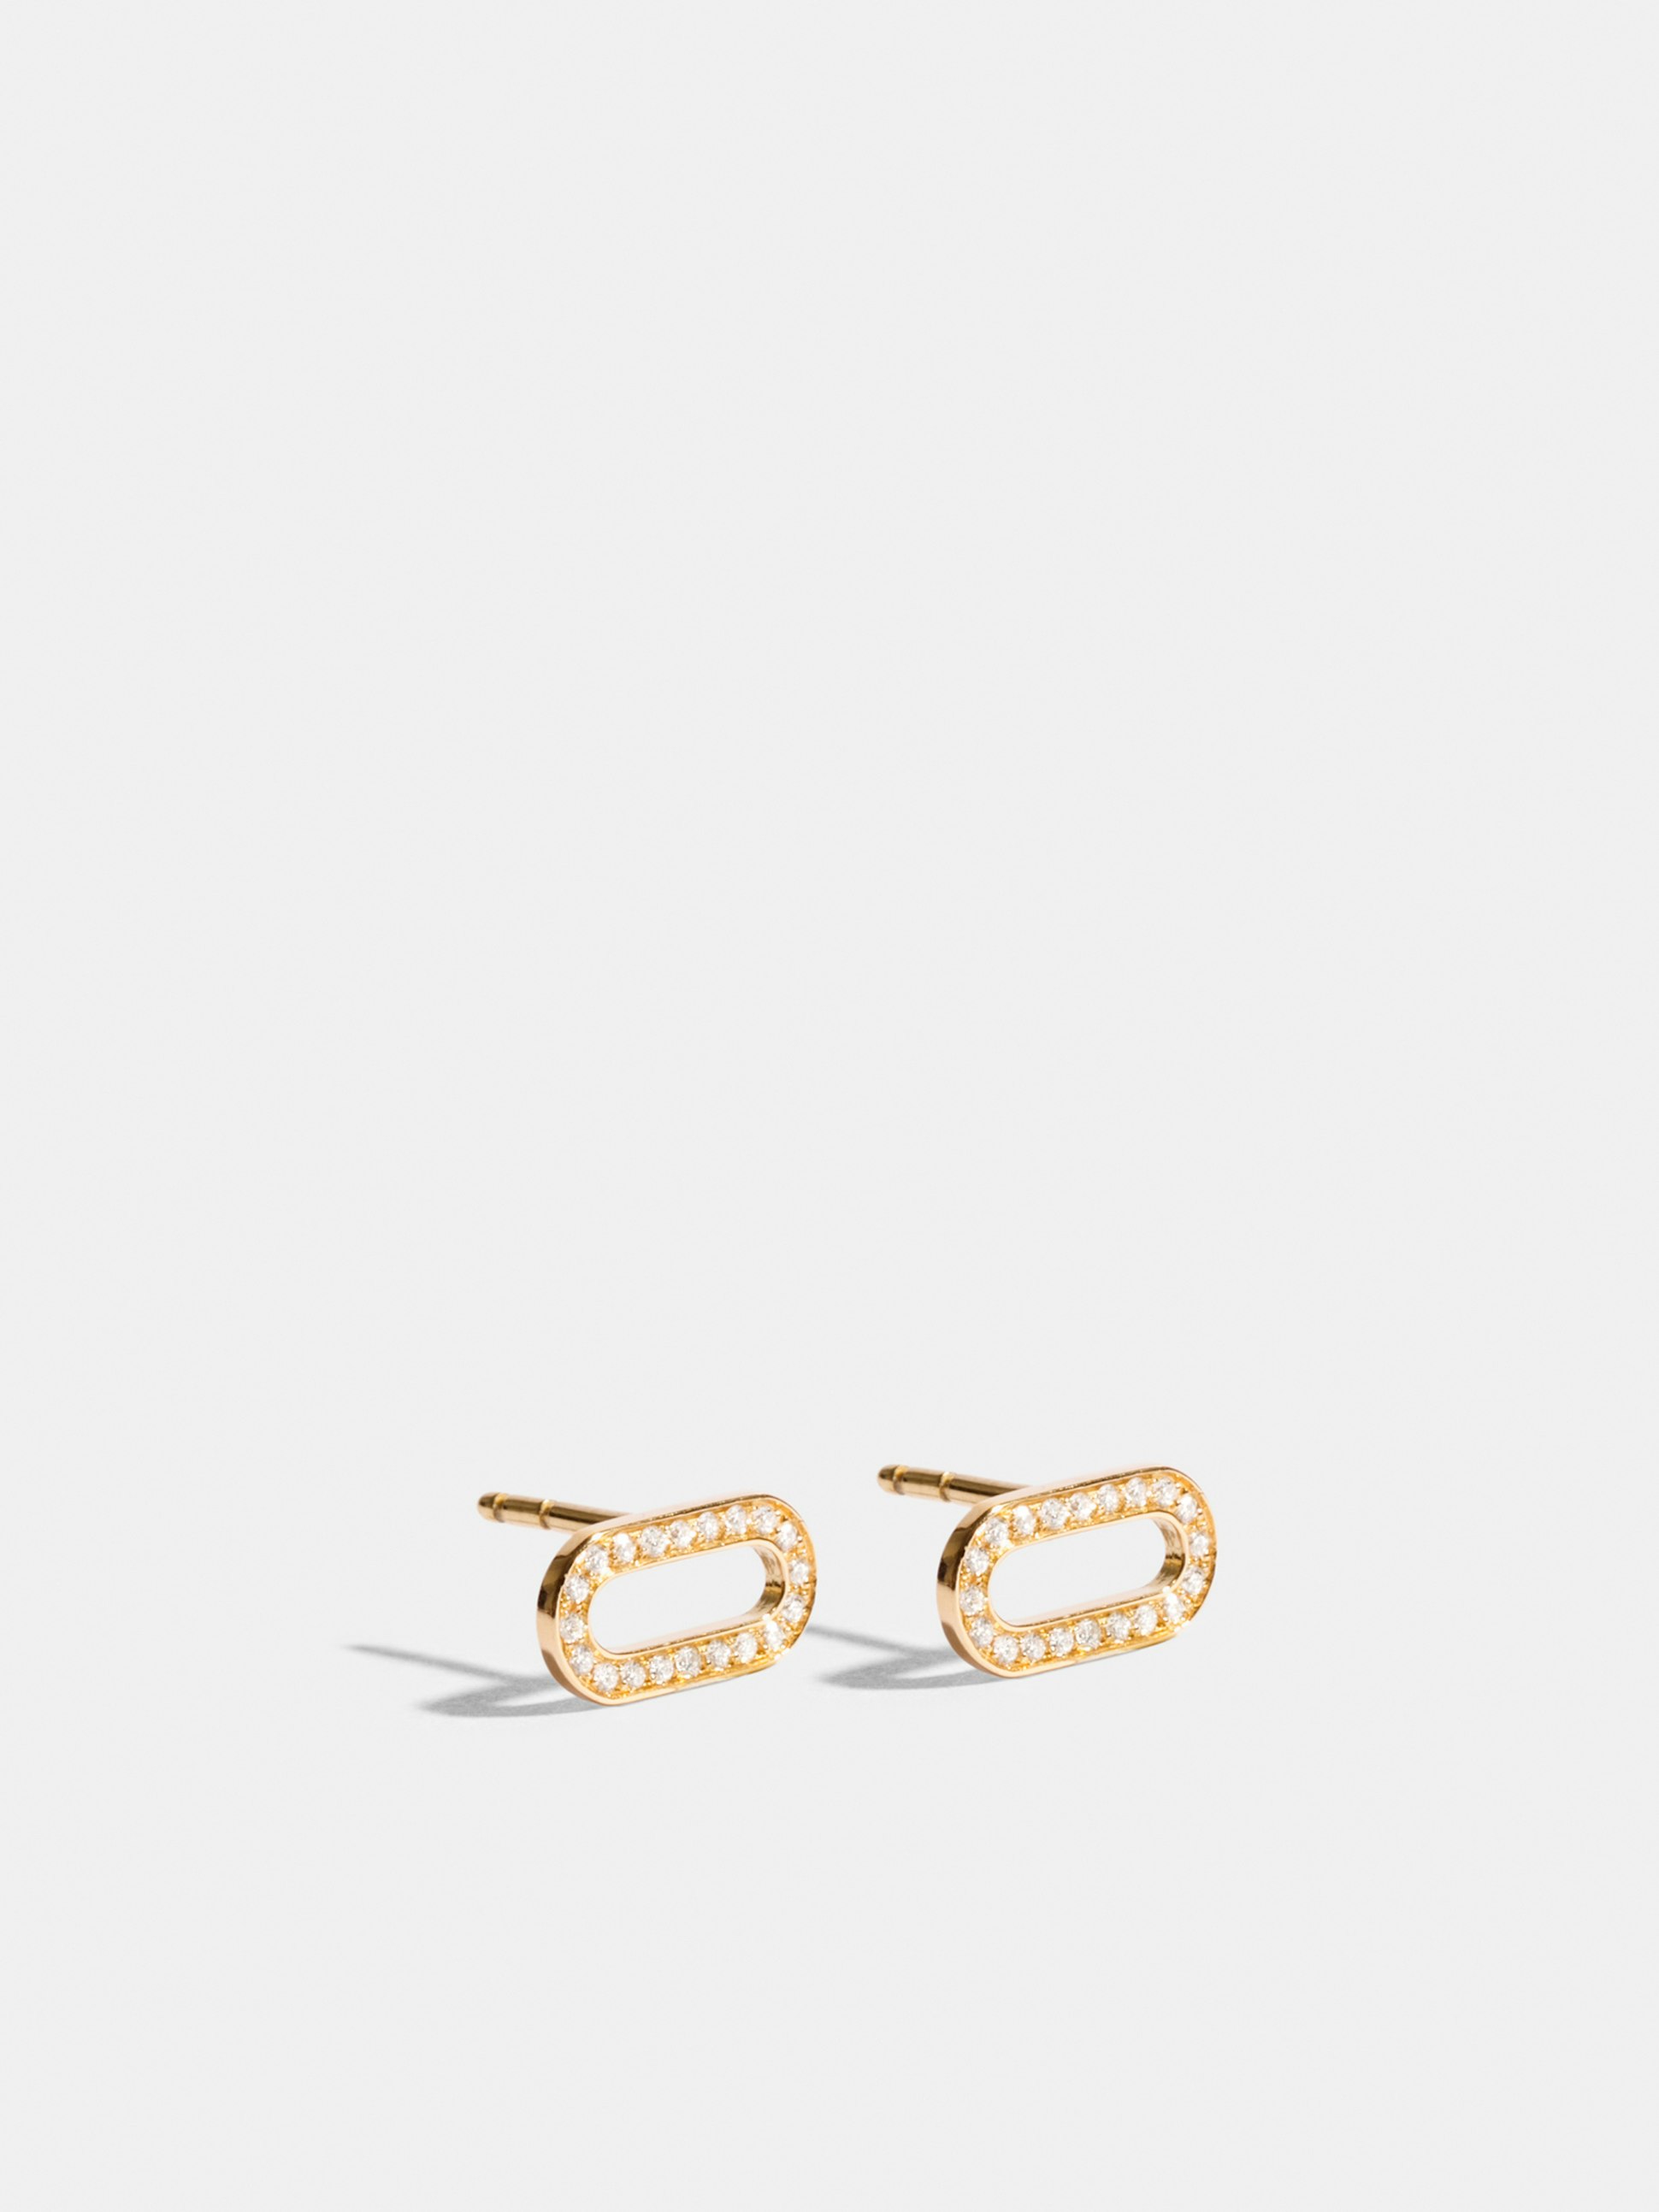 Étreintes ear clip paved in 18k Fairmined ethical yellow gold, paved with lab-grown diamonds, the pair.